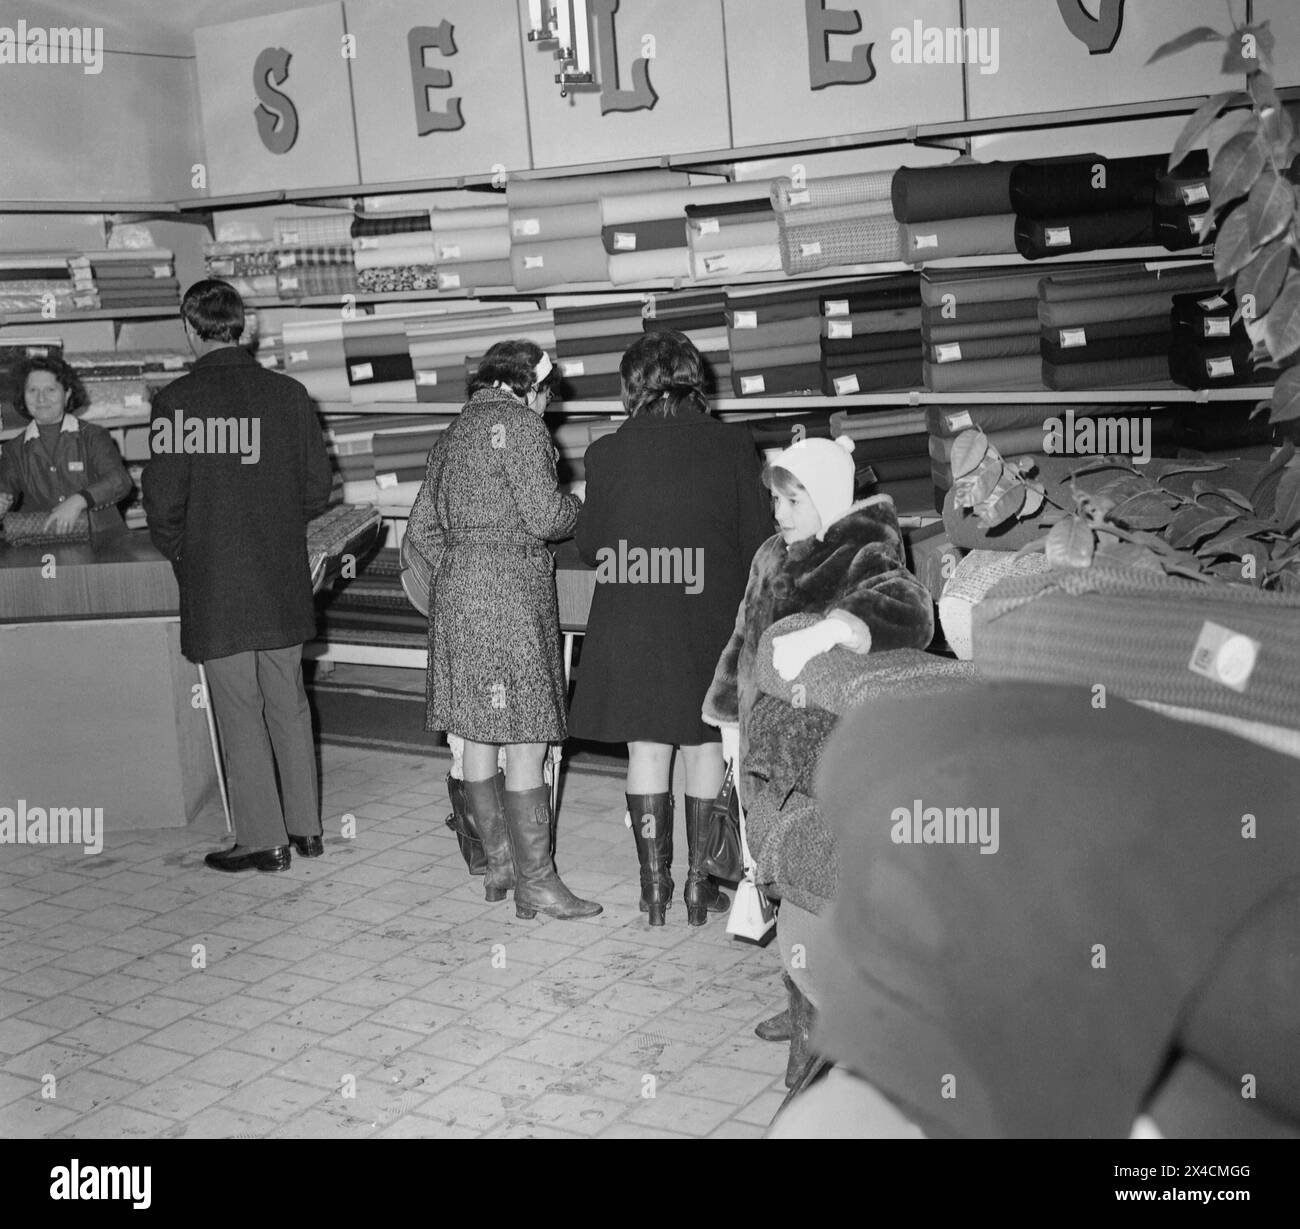 Socialist Republic of Romania in the 1970s. People inside a state-owned confections store. Stock Photo